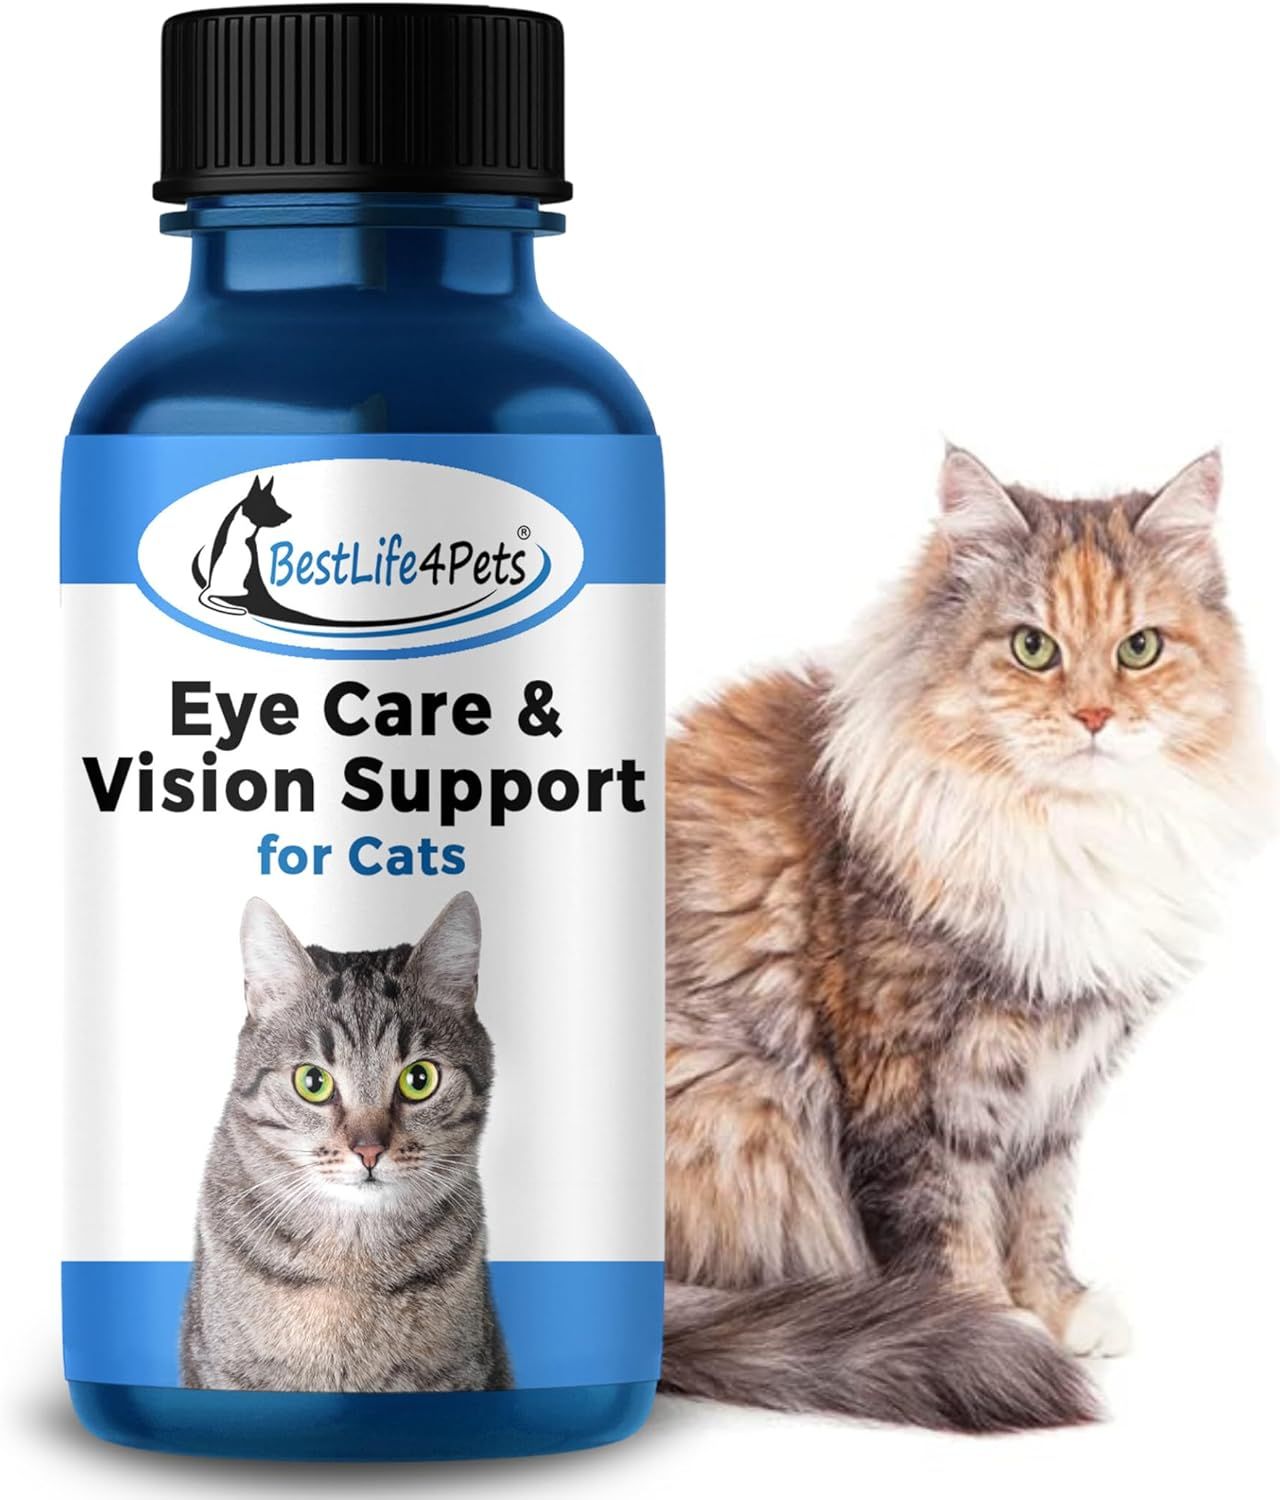 The Top 5 Best Eye Care Supplies for Cats